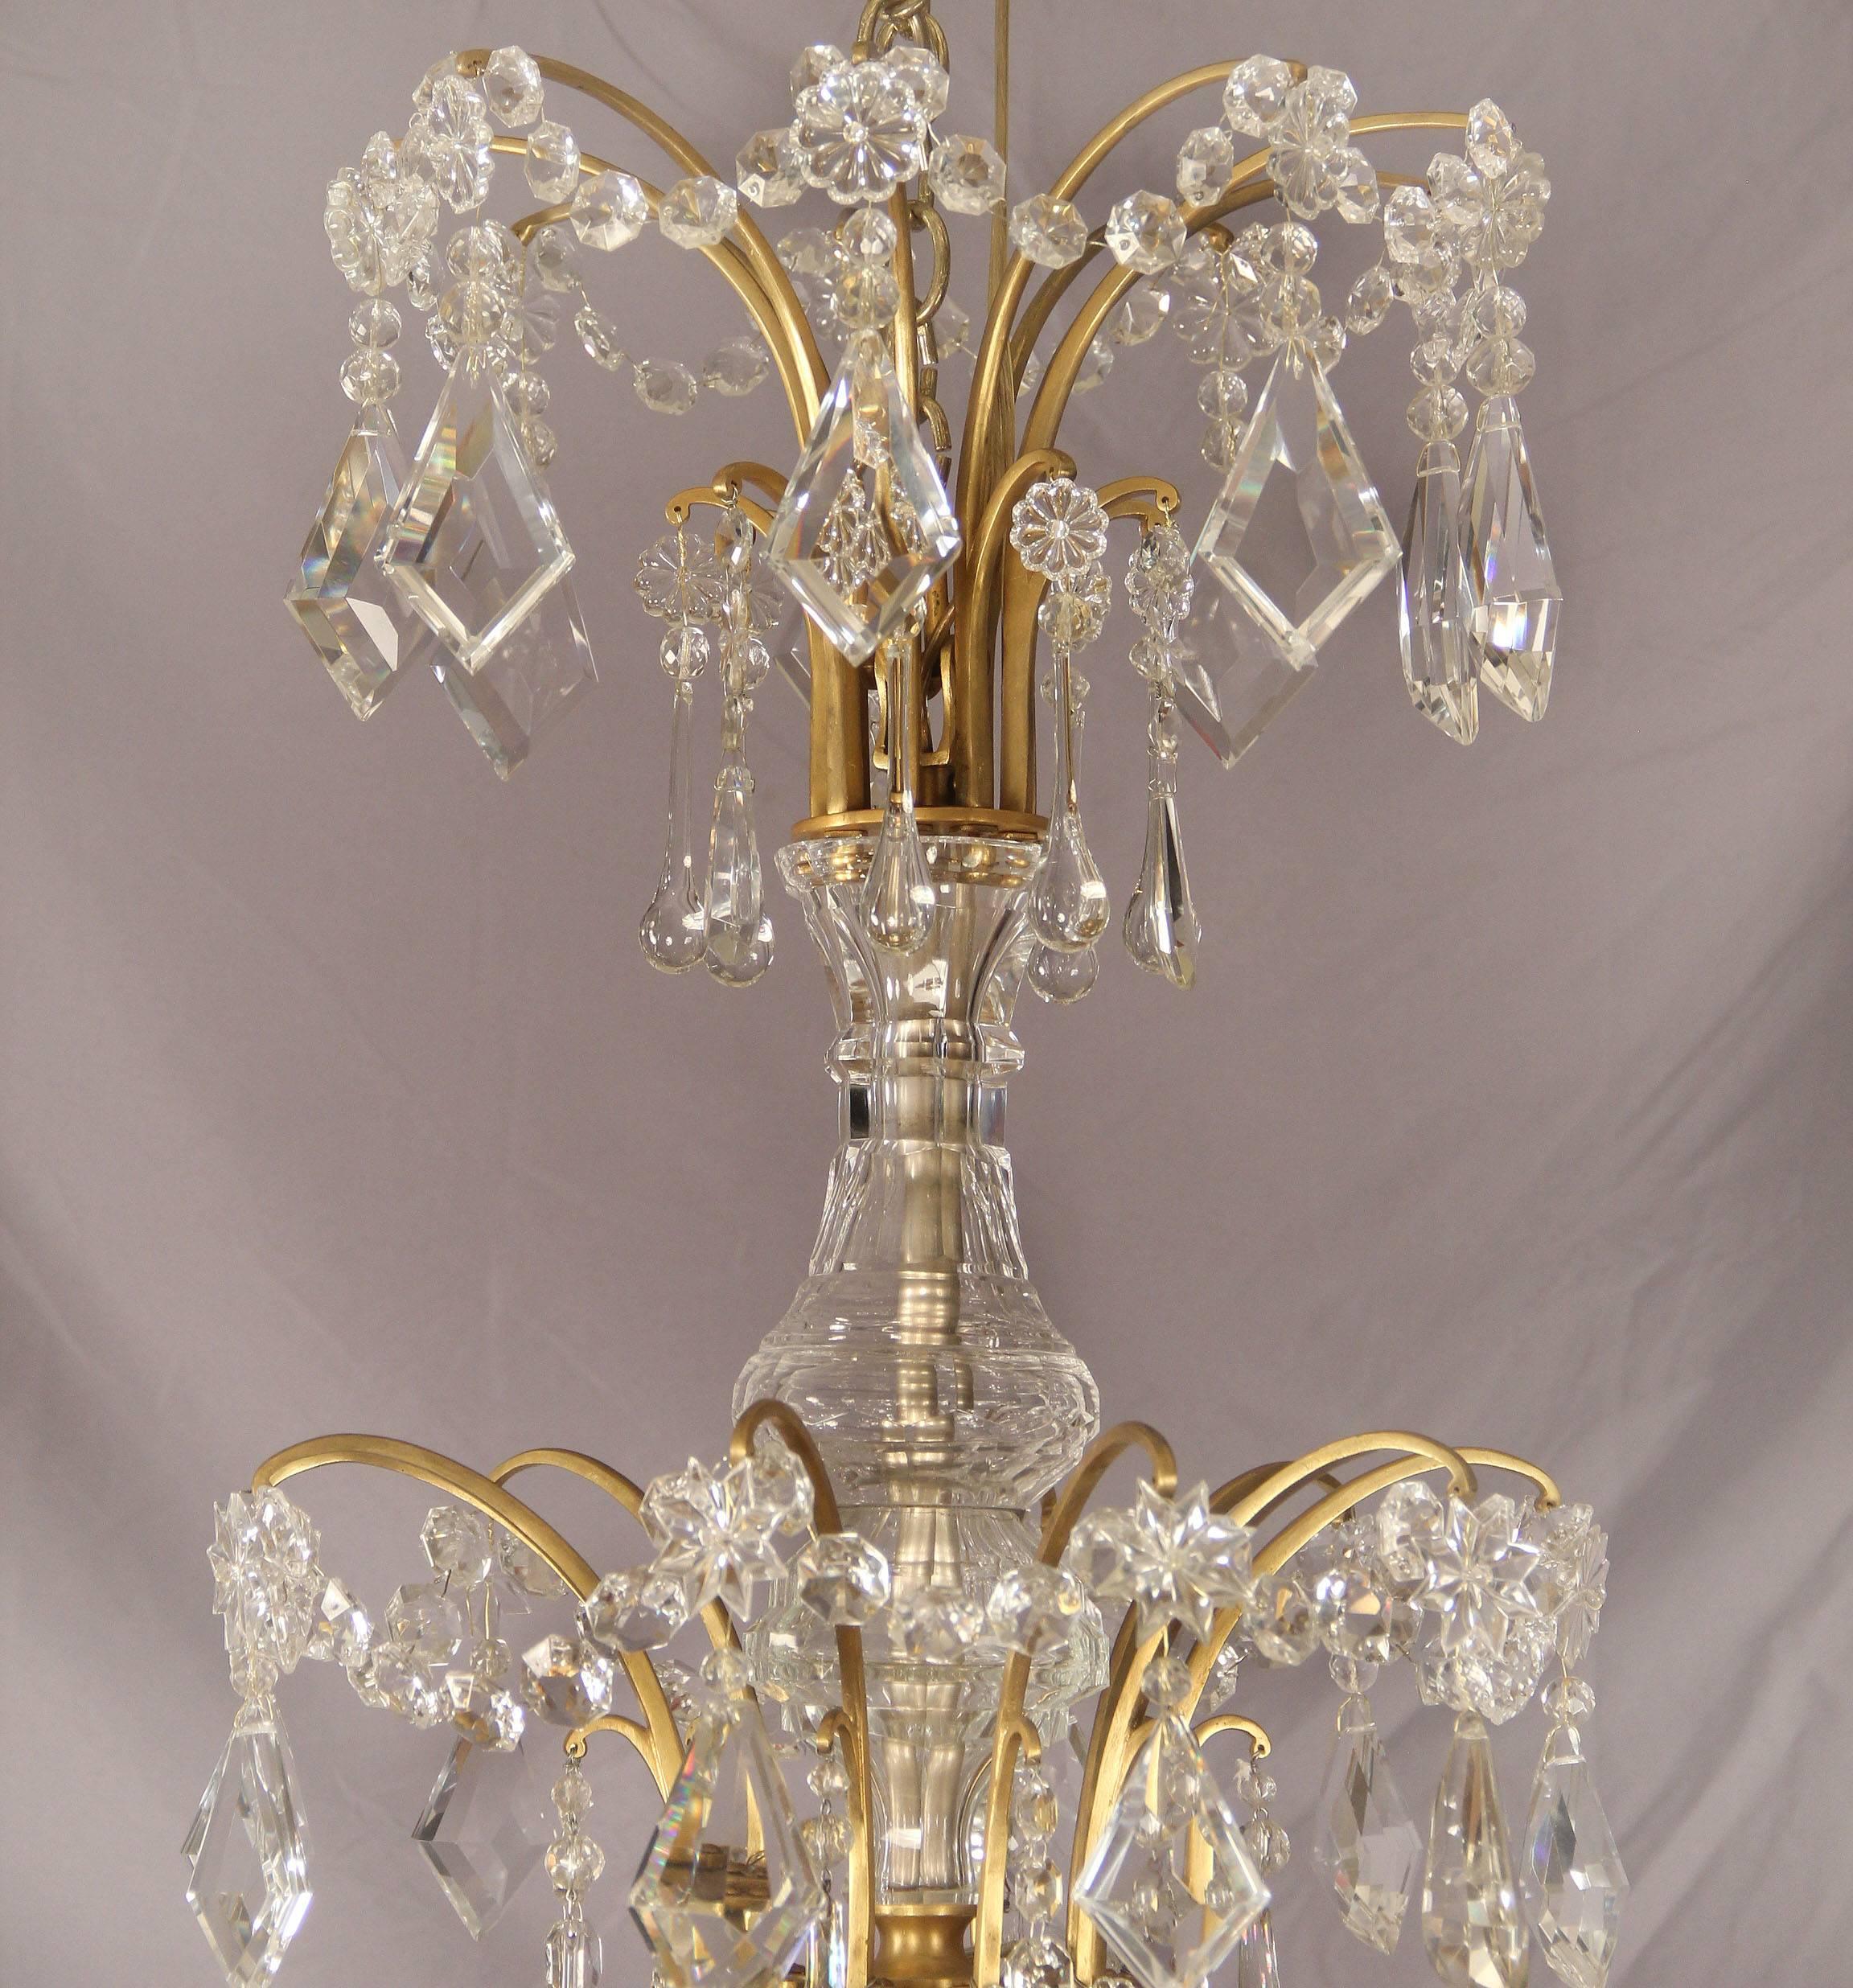 A palatial and unique late 19th century gilt bronze and crystal thirteen-light chandelier

by Maison Jansen, France.

Multi-faceted and shaped crystal, beaded swags and gilt chains throughout the entire chandelier. Twelve perimeter lights with